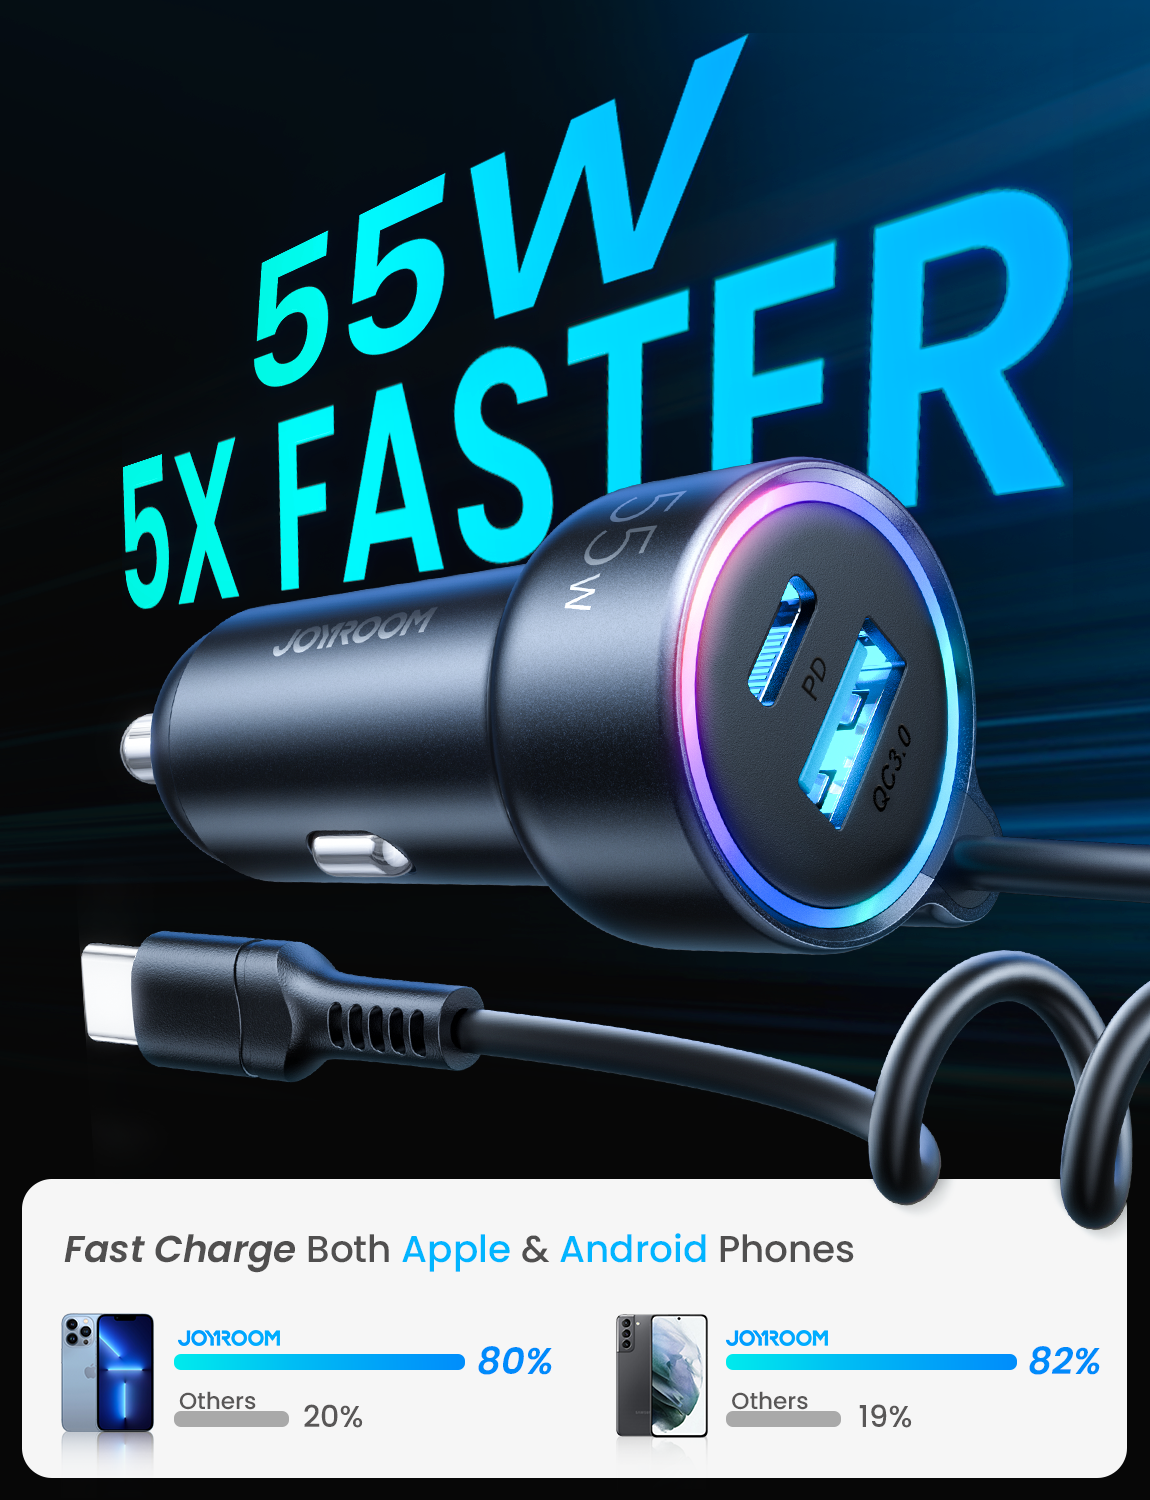 55W 3 Port [Dual PD 3.0+QC 3.0] Fast Car Charger Adapter with Built-in USB C Coil,Compatible with iPhone 13/12/11,iPad Pro/Mini,Samsung Galaxy S21/S20 etc